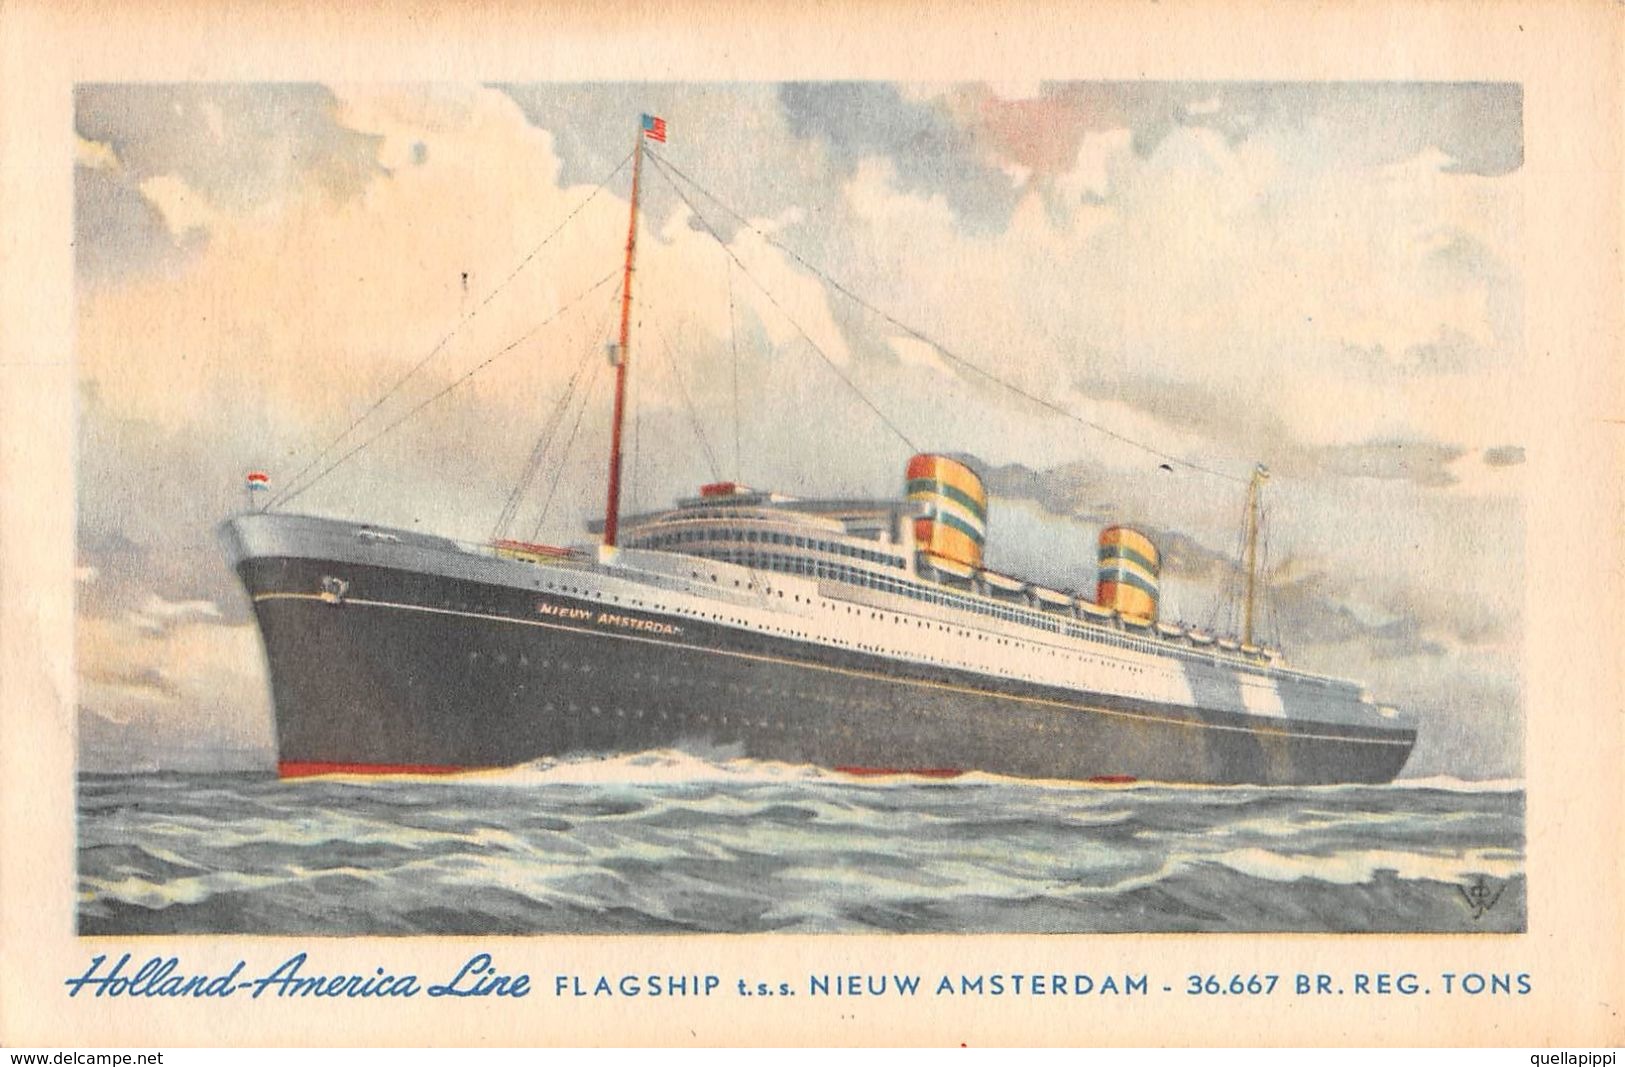 07194 "HOLLAND-AMERICA LINE - FLAGSHIP T.S.S. NIEUW AMSTERDAM - 36.667 BR. REG. TONS" CART. NON SPED - Banche